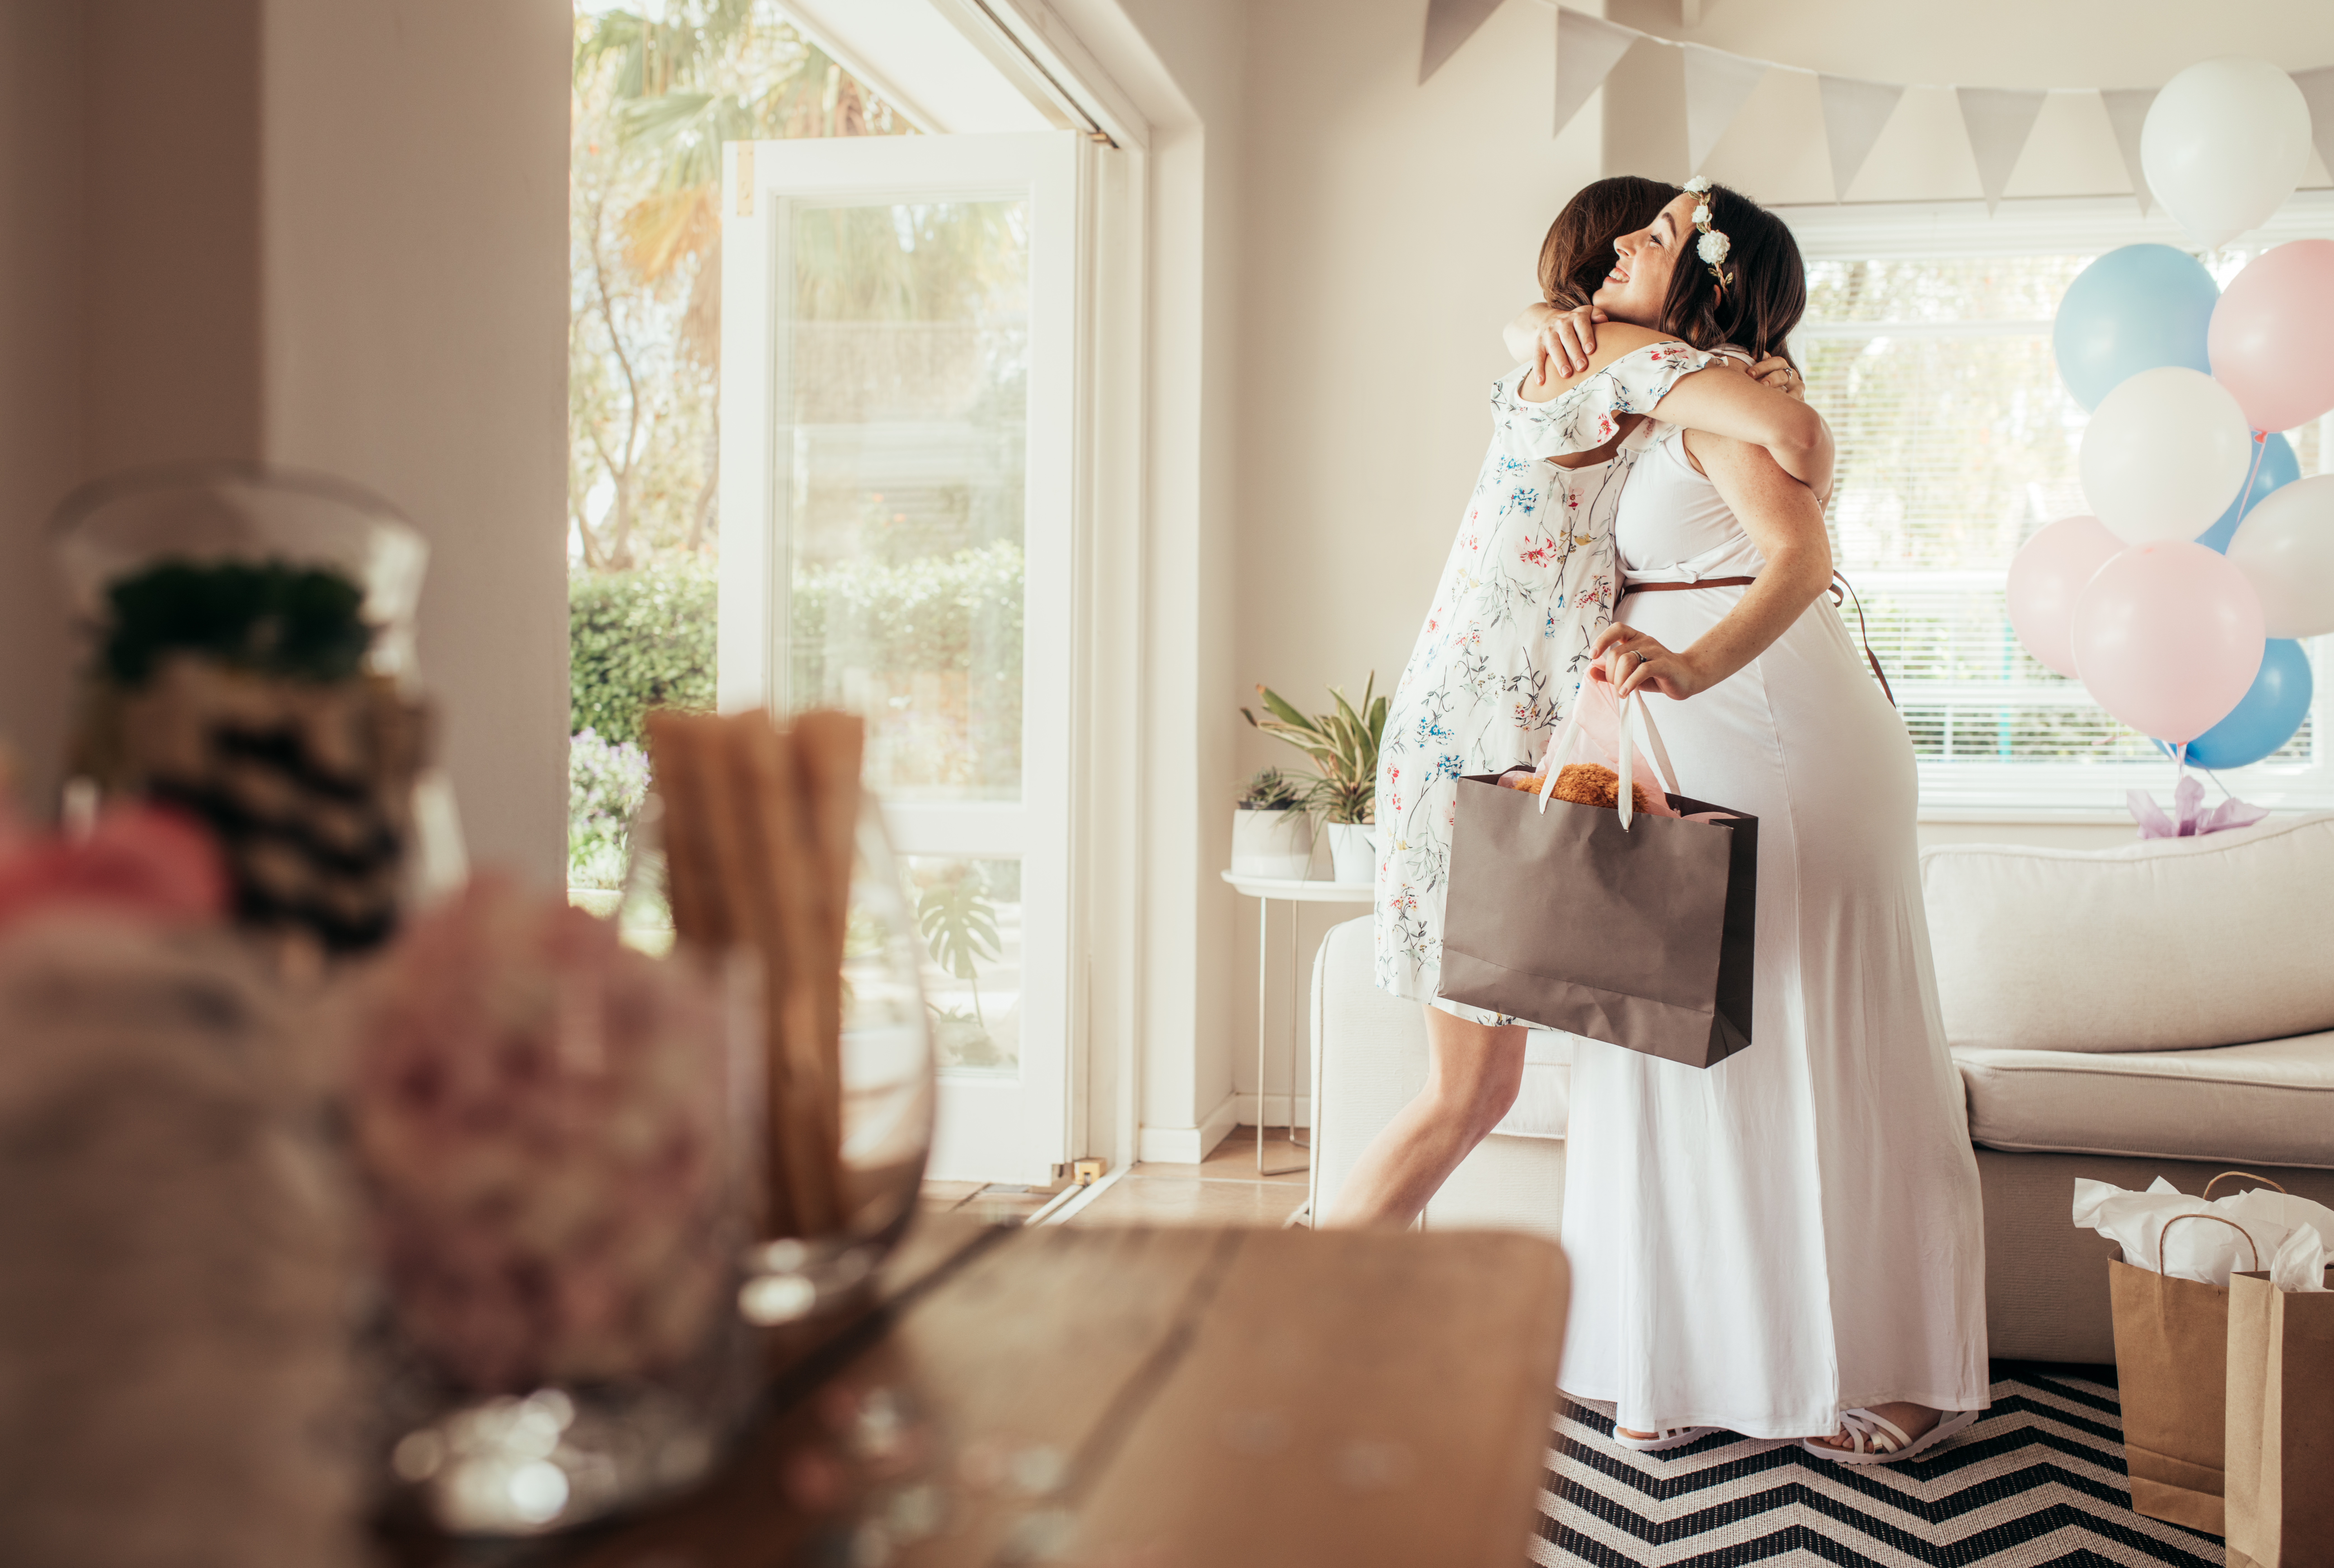 A woman hugging and gifting an expectant woman something at a baby shower  | Source: Shutterstock